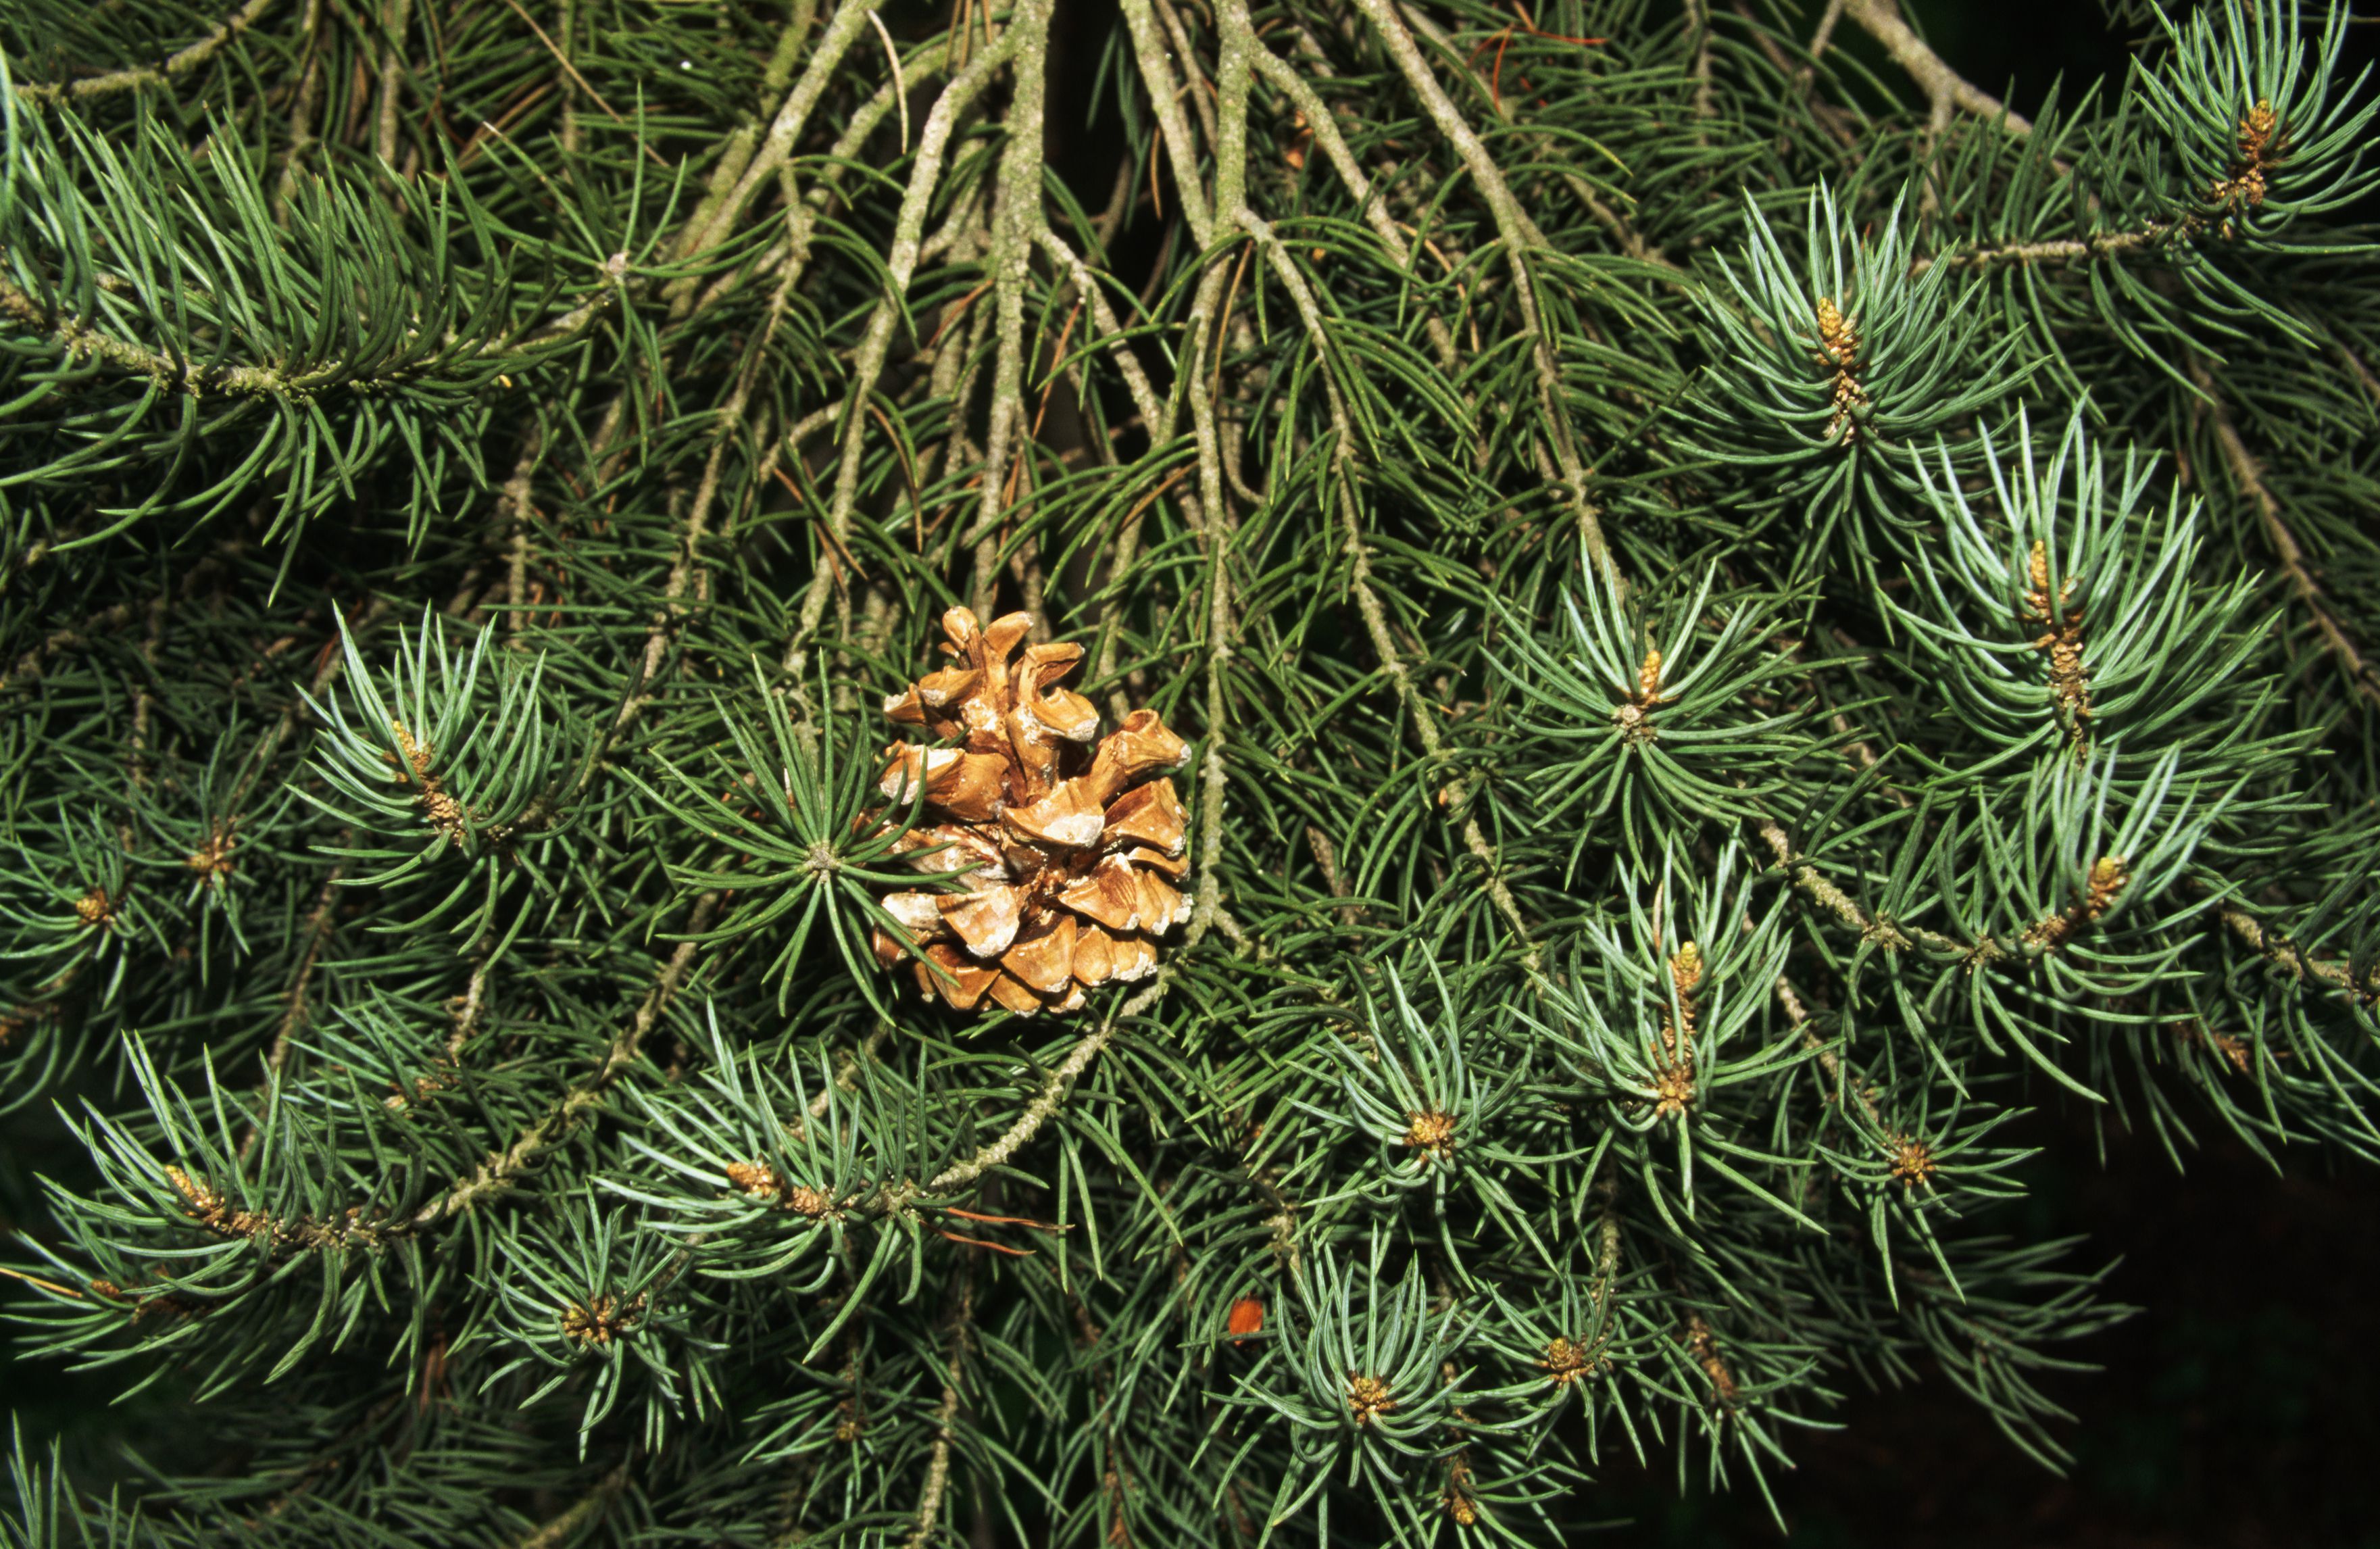 40 Pine Trees From Around the World